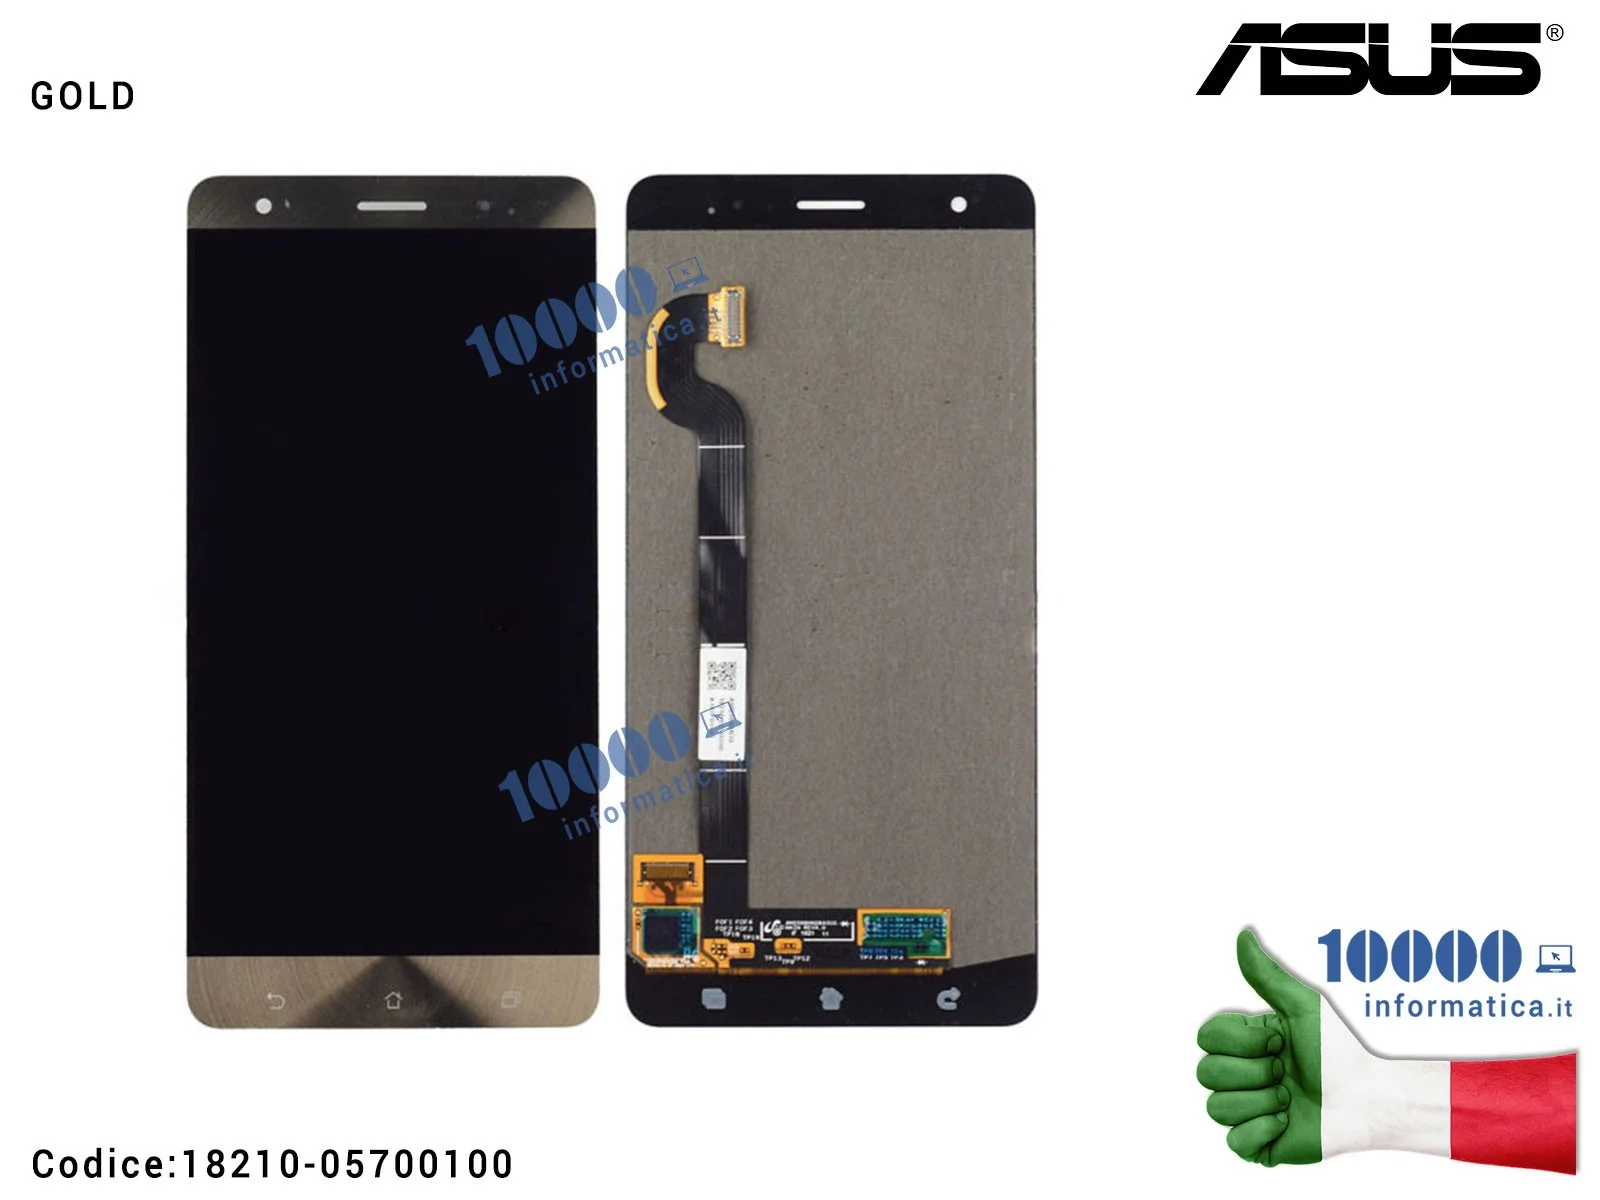 18210-05700100 Display LCD con Vetro Touch Screen ASUS ZenFone 3 Deluxe ZS570KL (Z016D) OLED 5,7'' FHD Full-HD [GOLD]